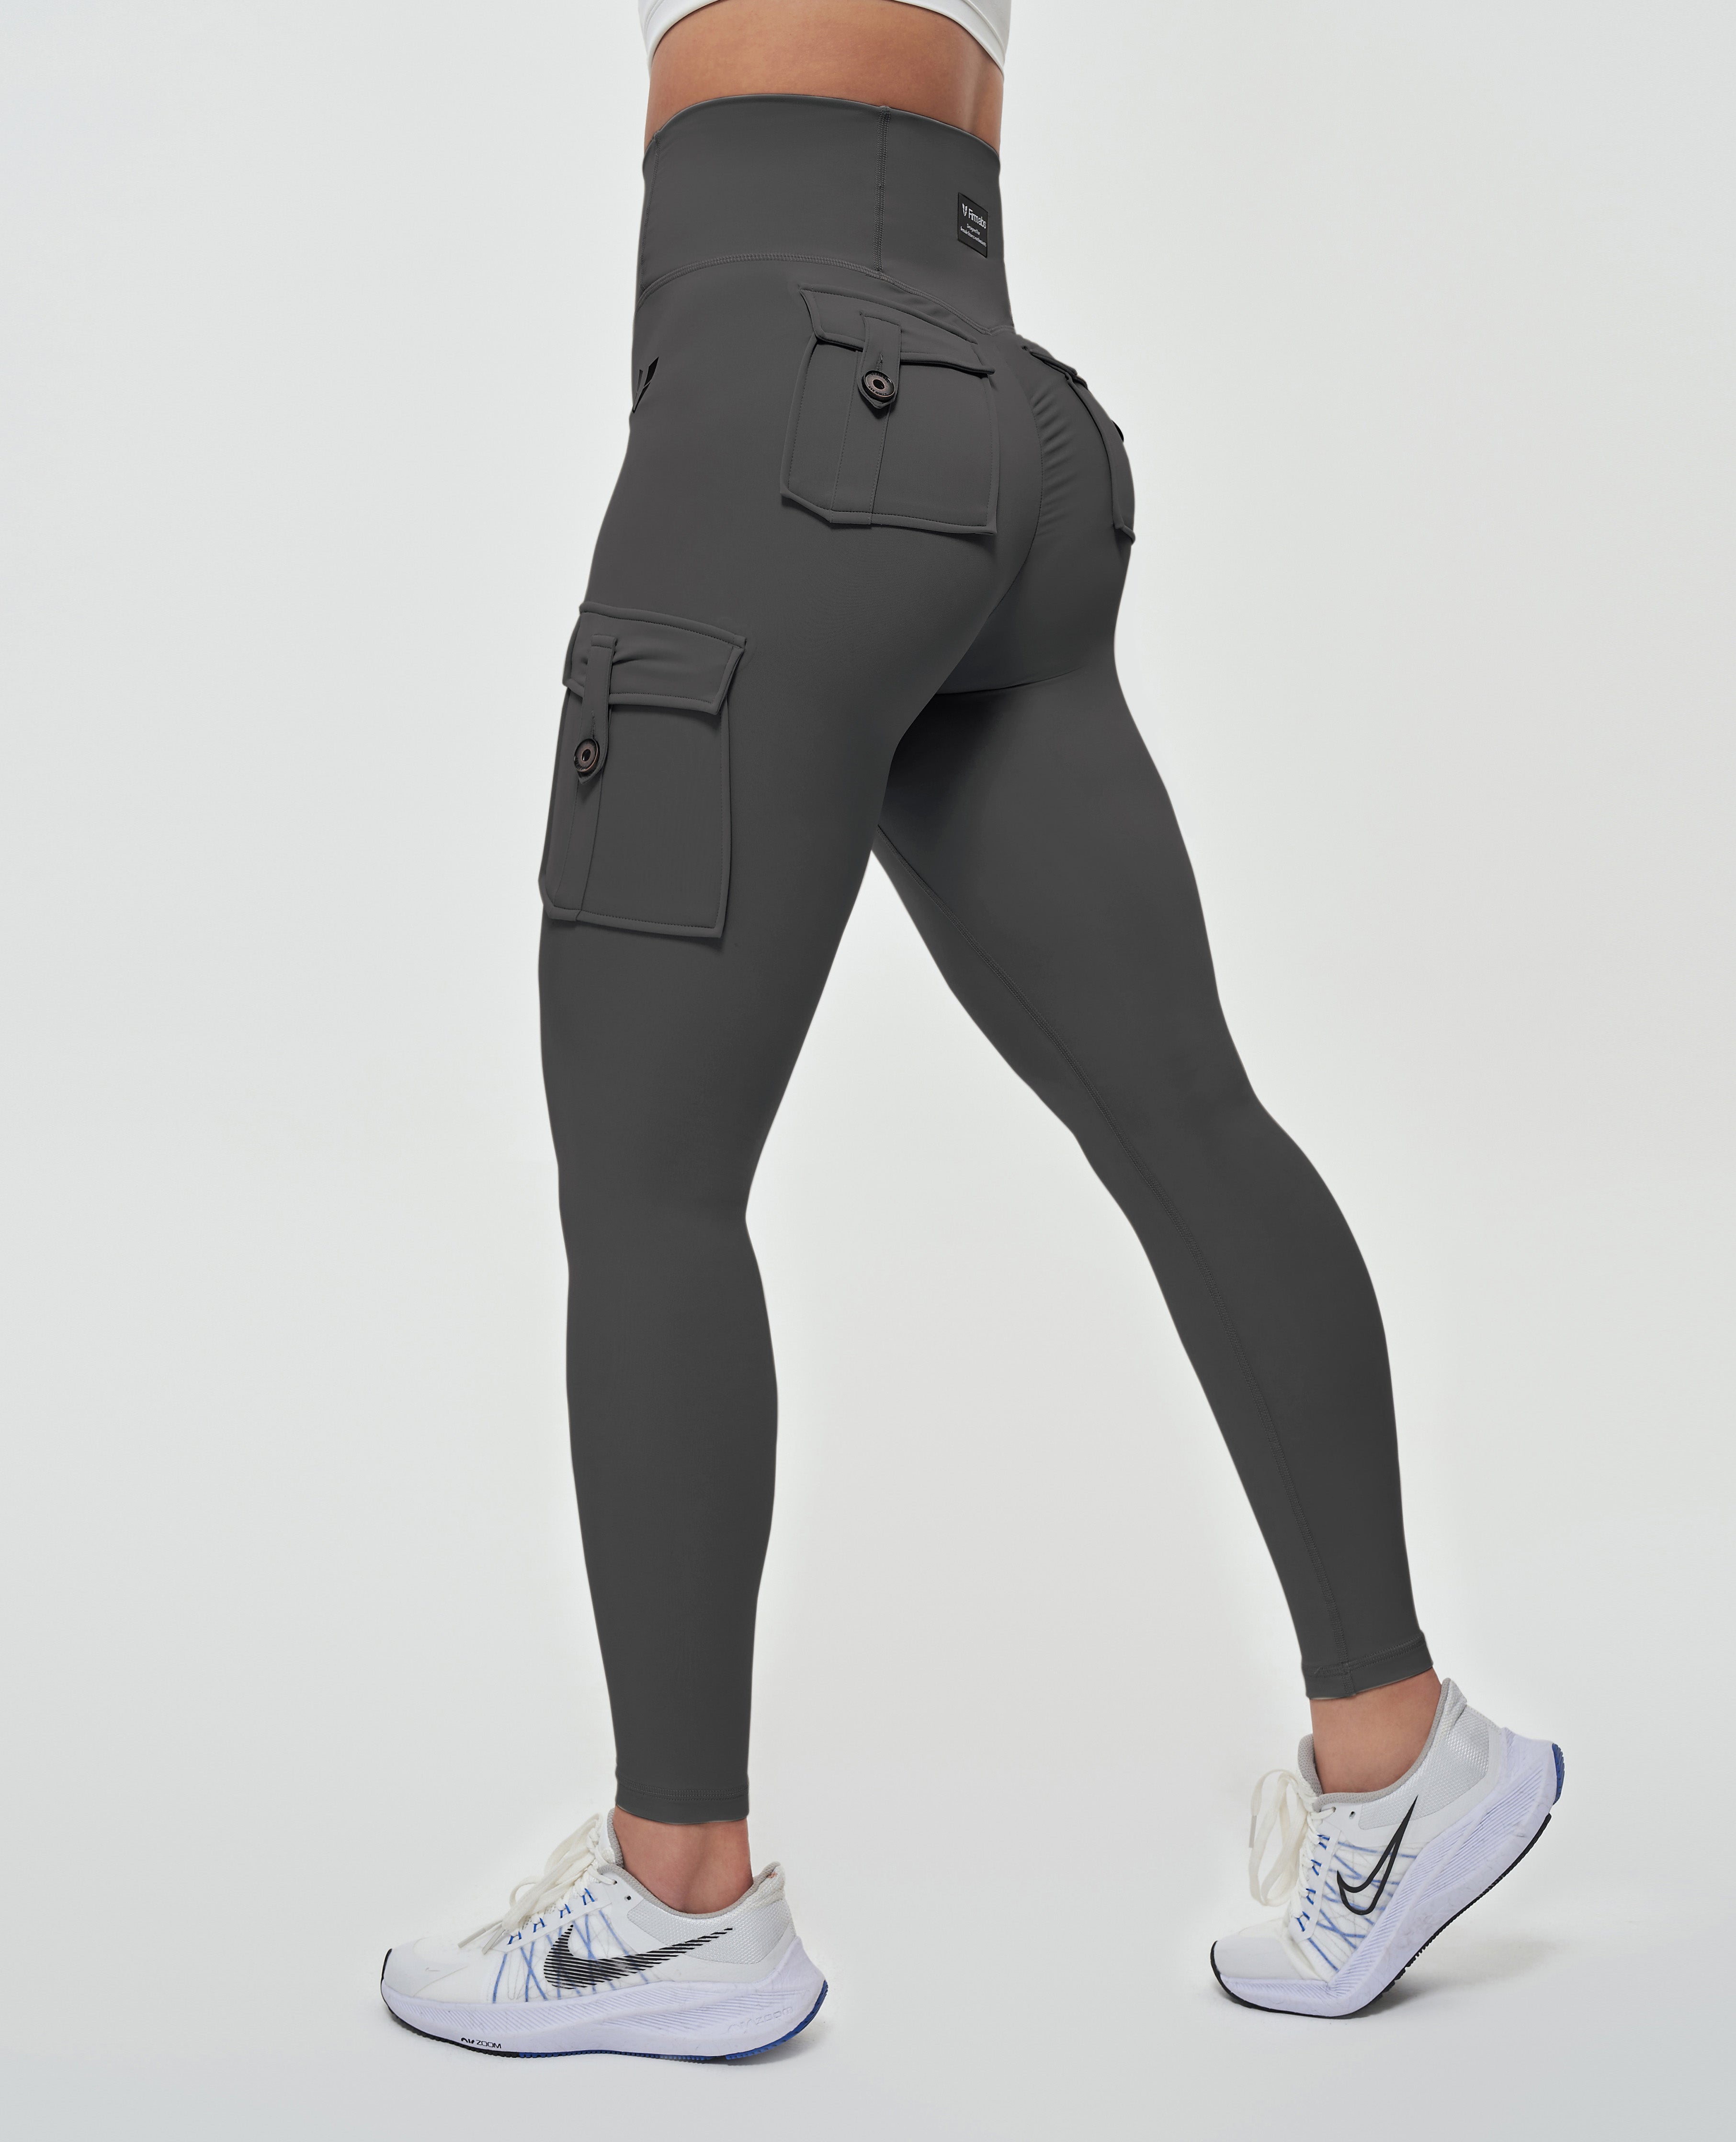 High Waisted Compression Leggings - Plum Brown